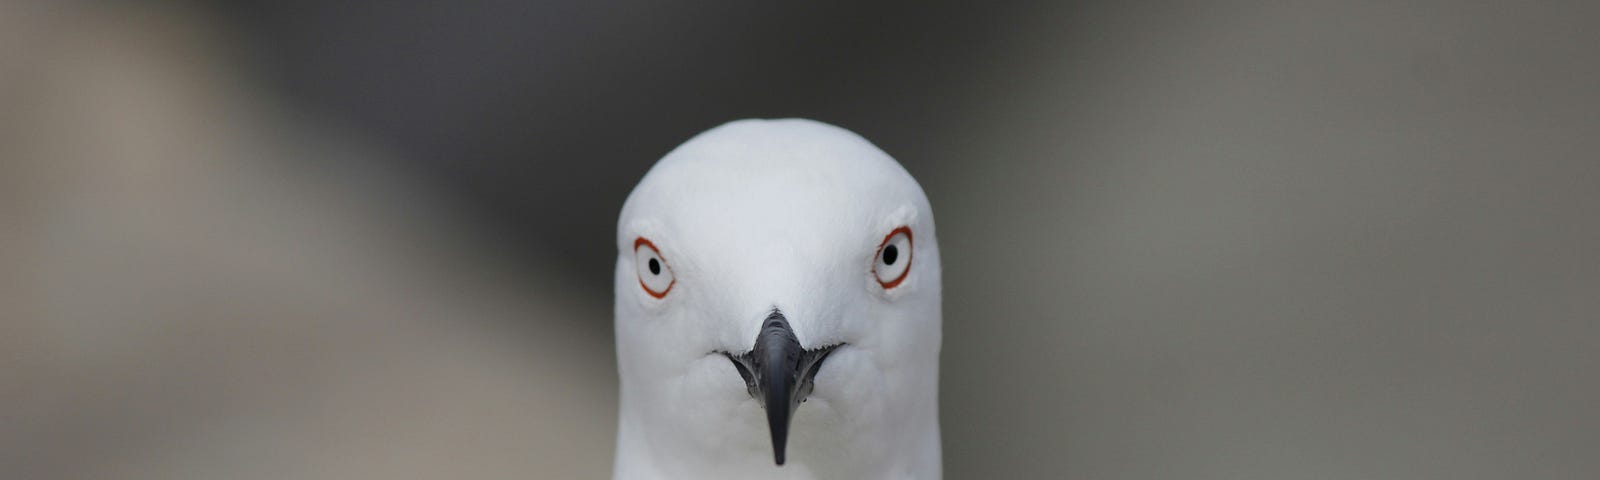 A close-up of a white pigeon with a focused, almost stern expression. The bird’s sharp beak and intense eyes create a striking and somewhat humorous portrait.